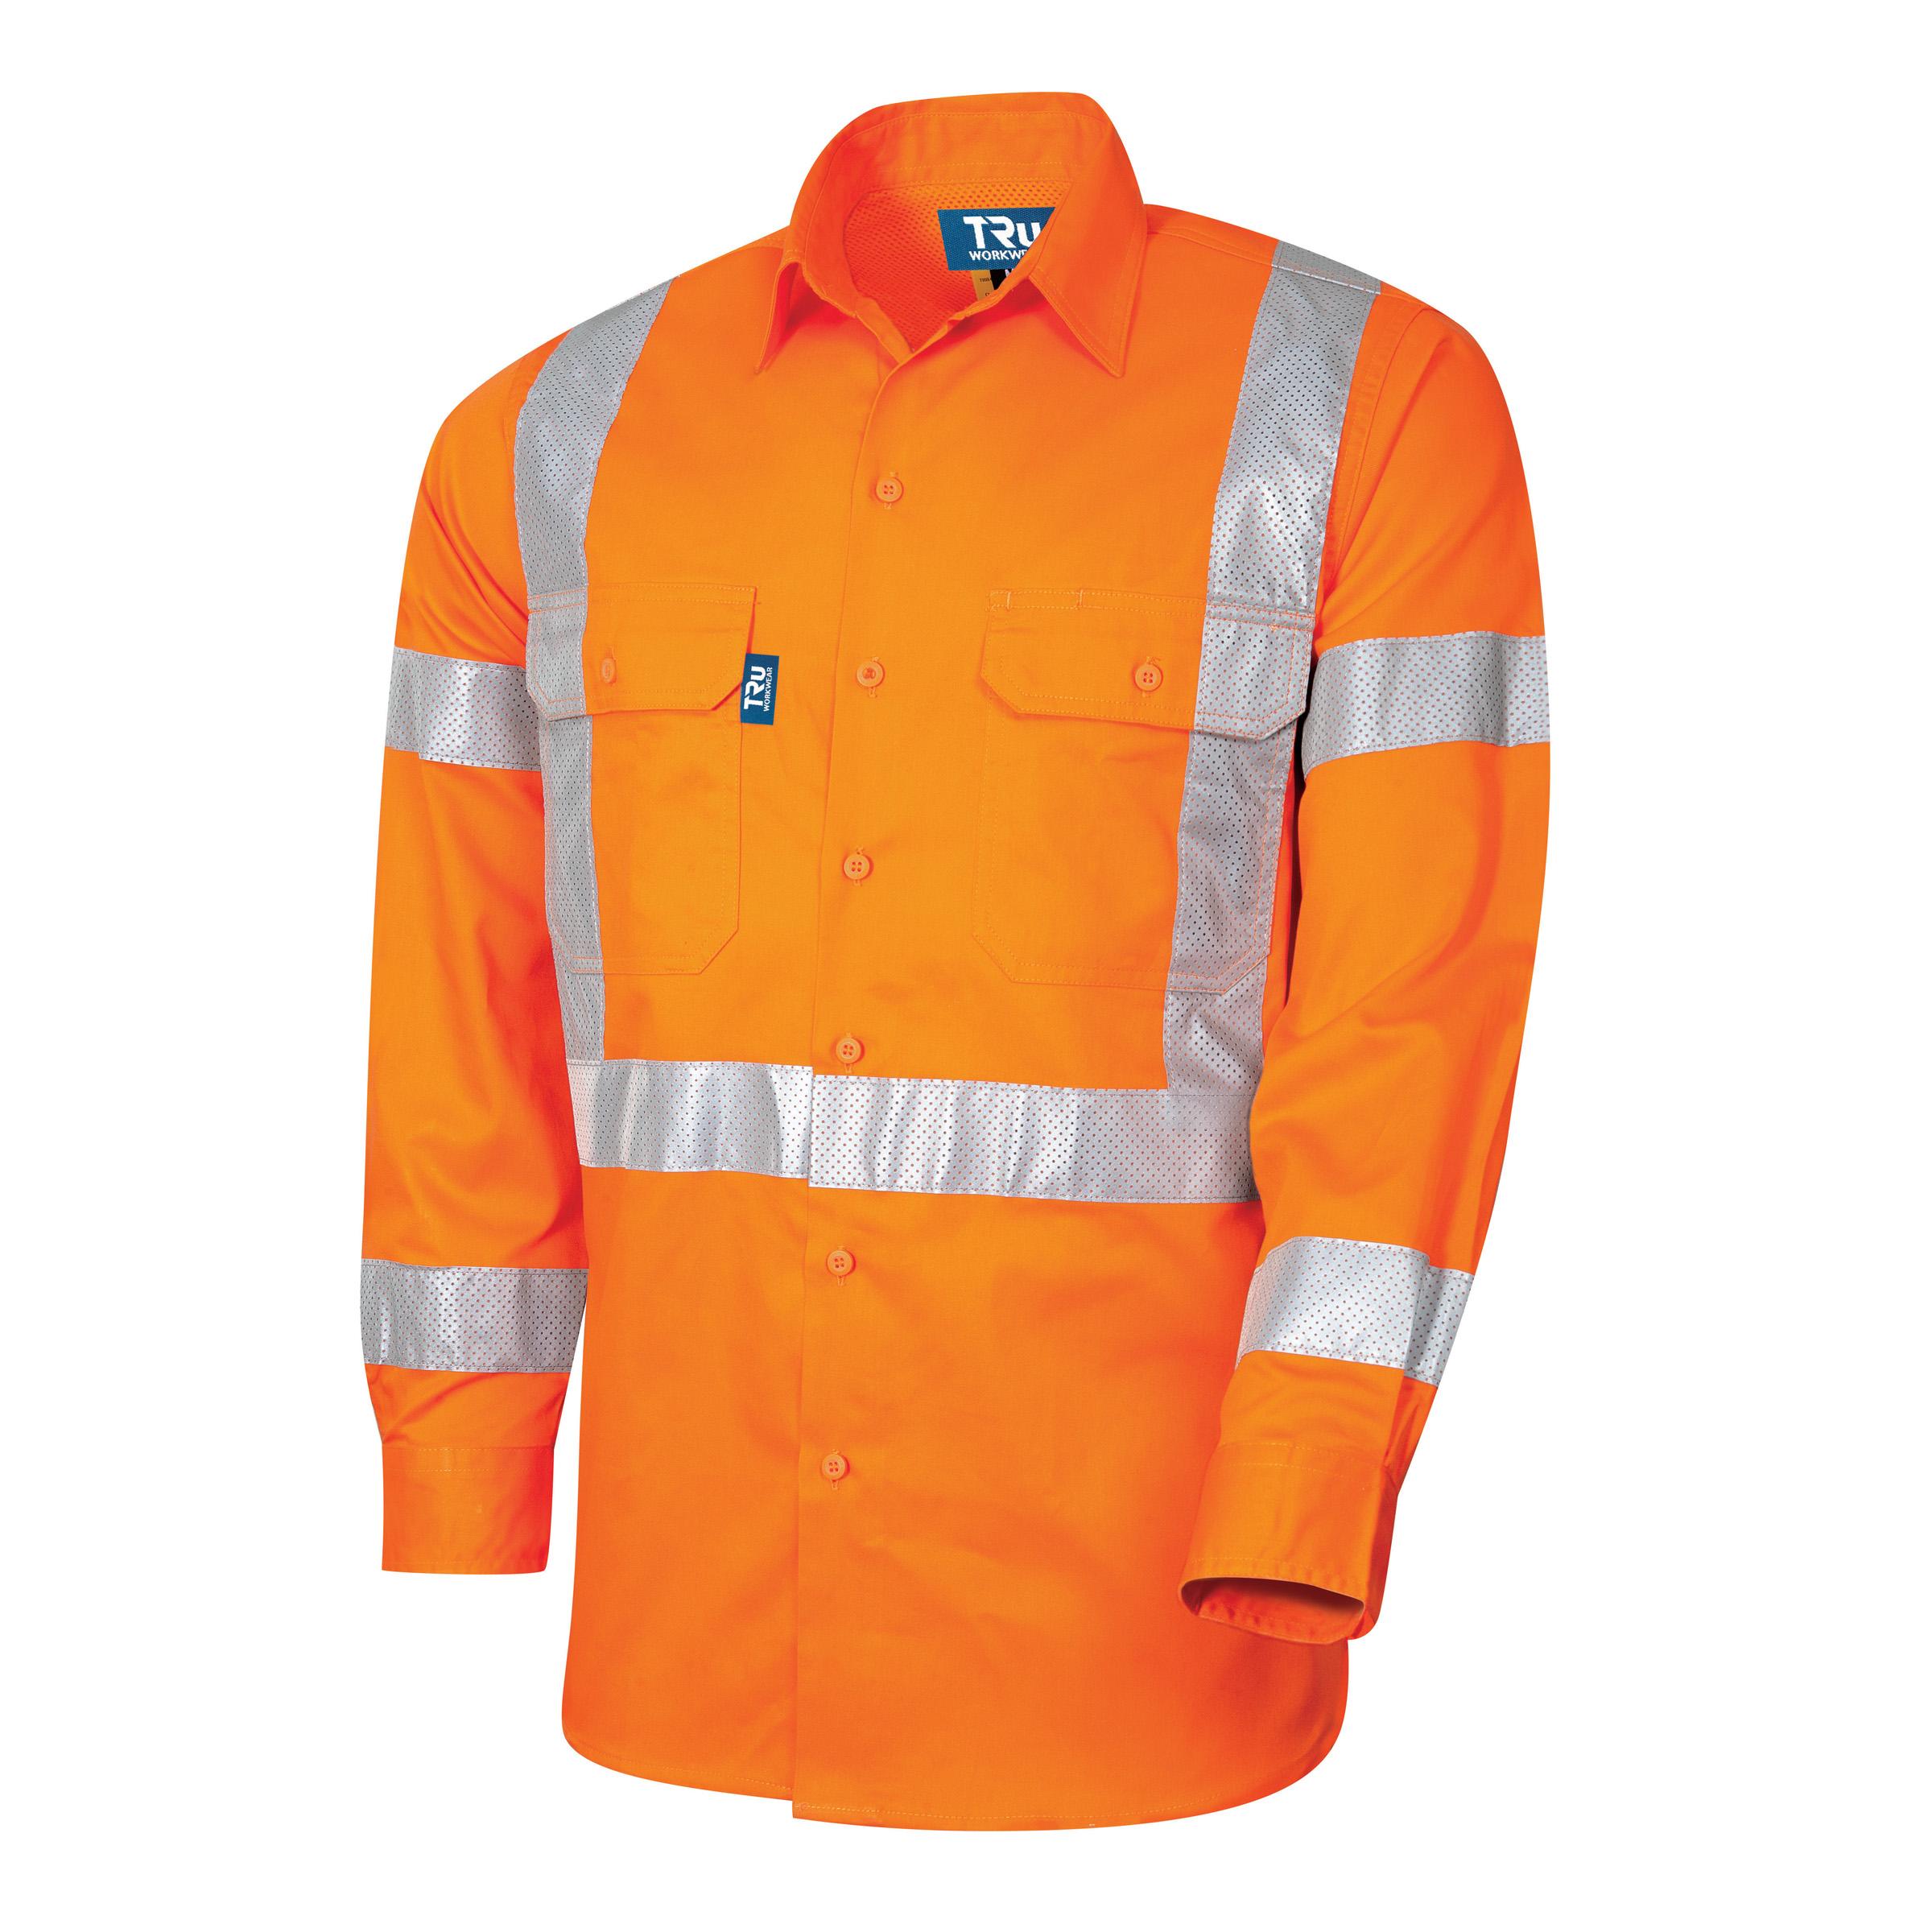 Tru Workwear Midweight Hi-Vis Cotton Drill Jacket With Reflective Tape-